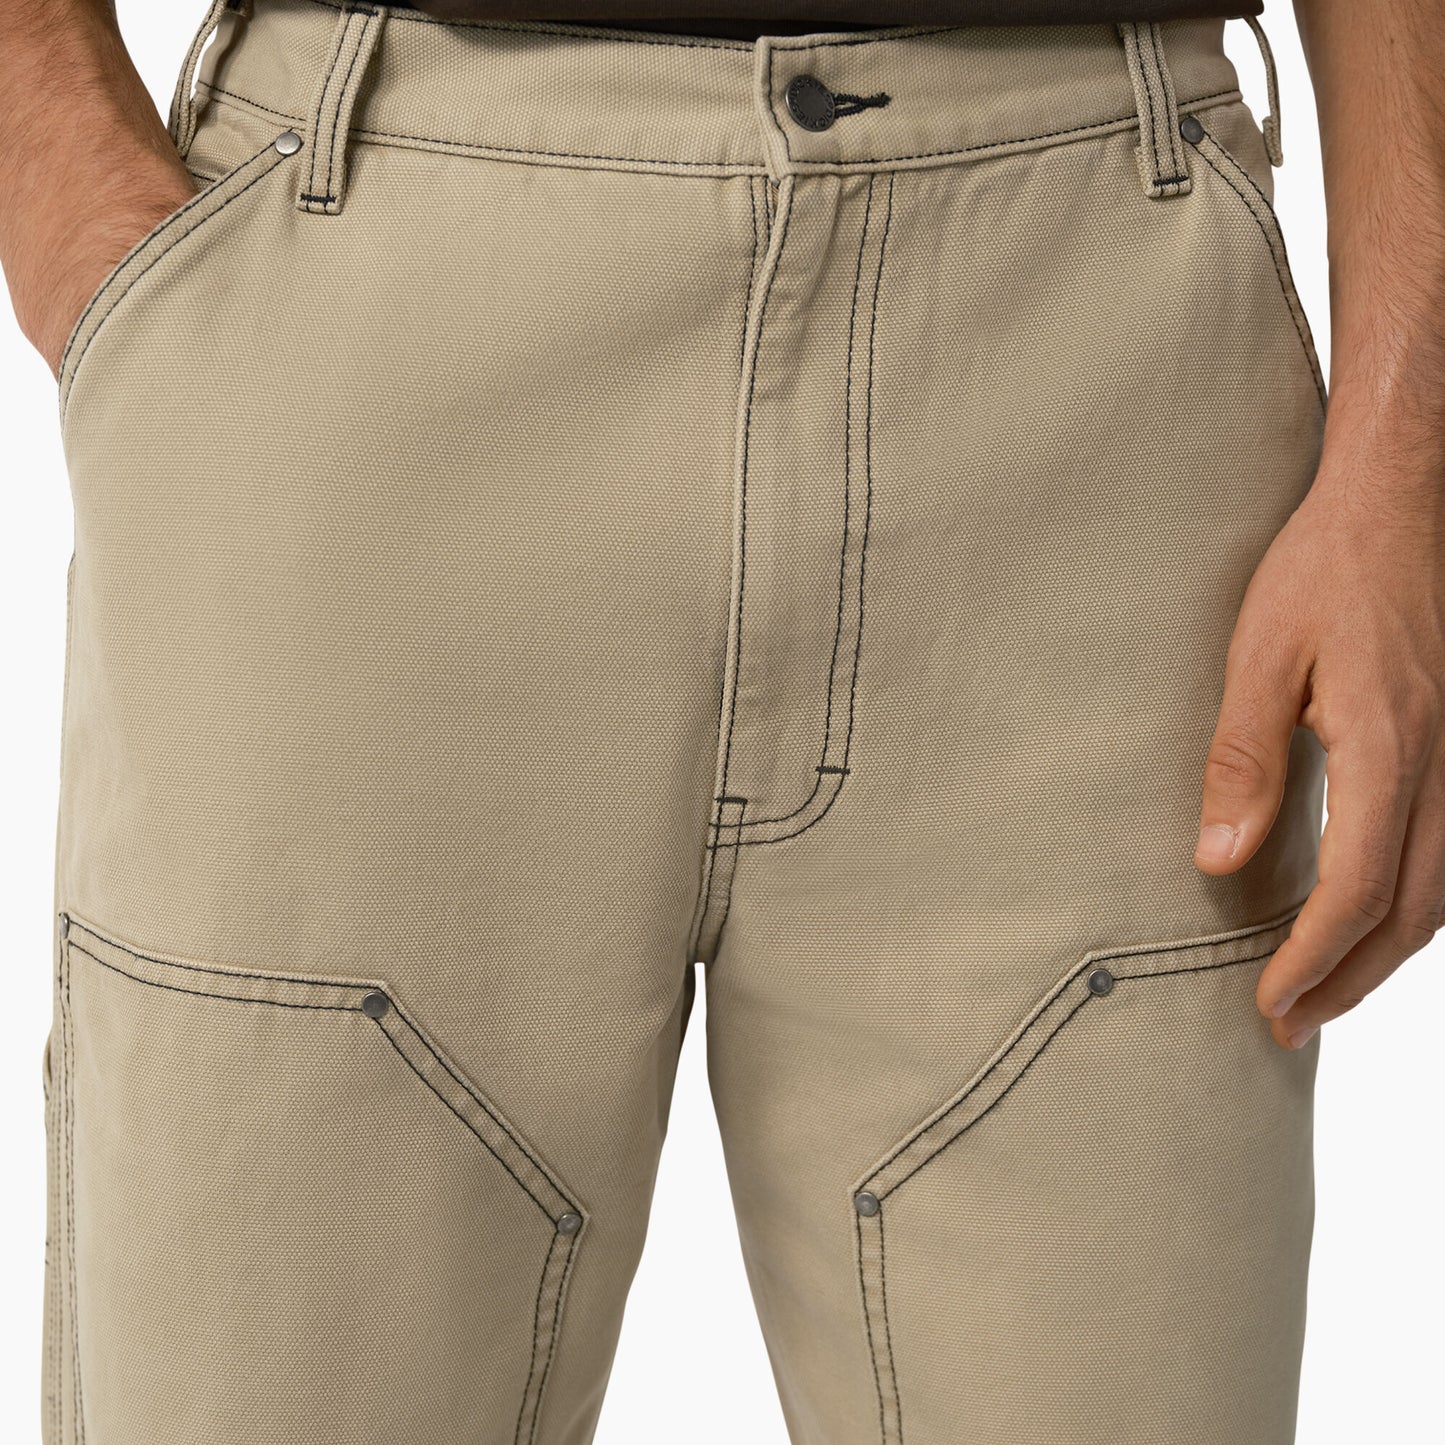 Dickies Contrast Stitch Double Front Pants - Stonewashed Desert Sand/Black